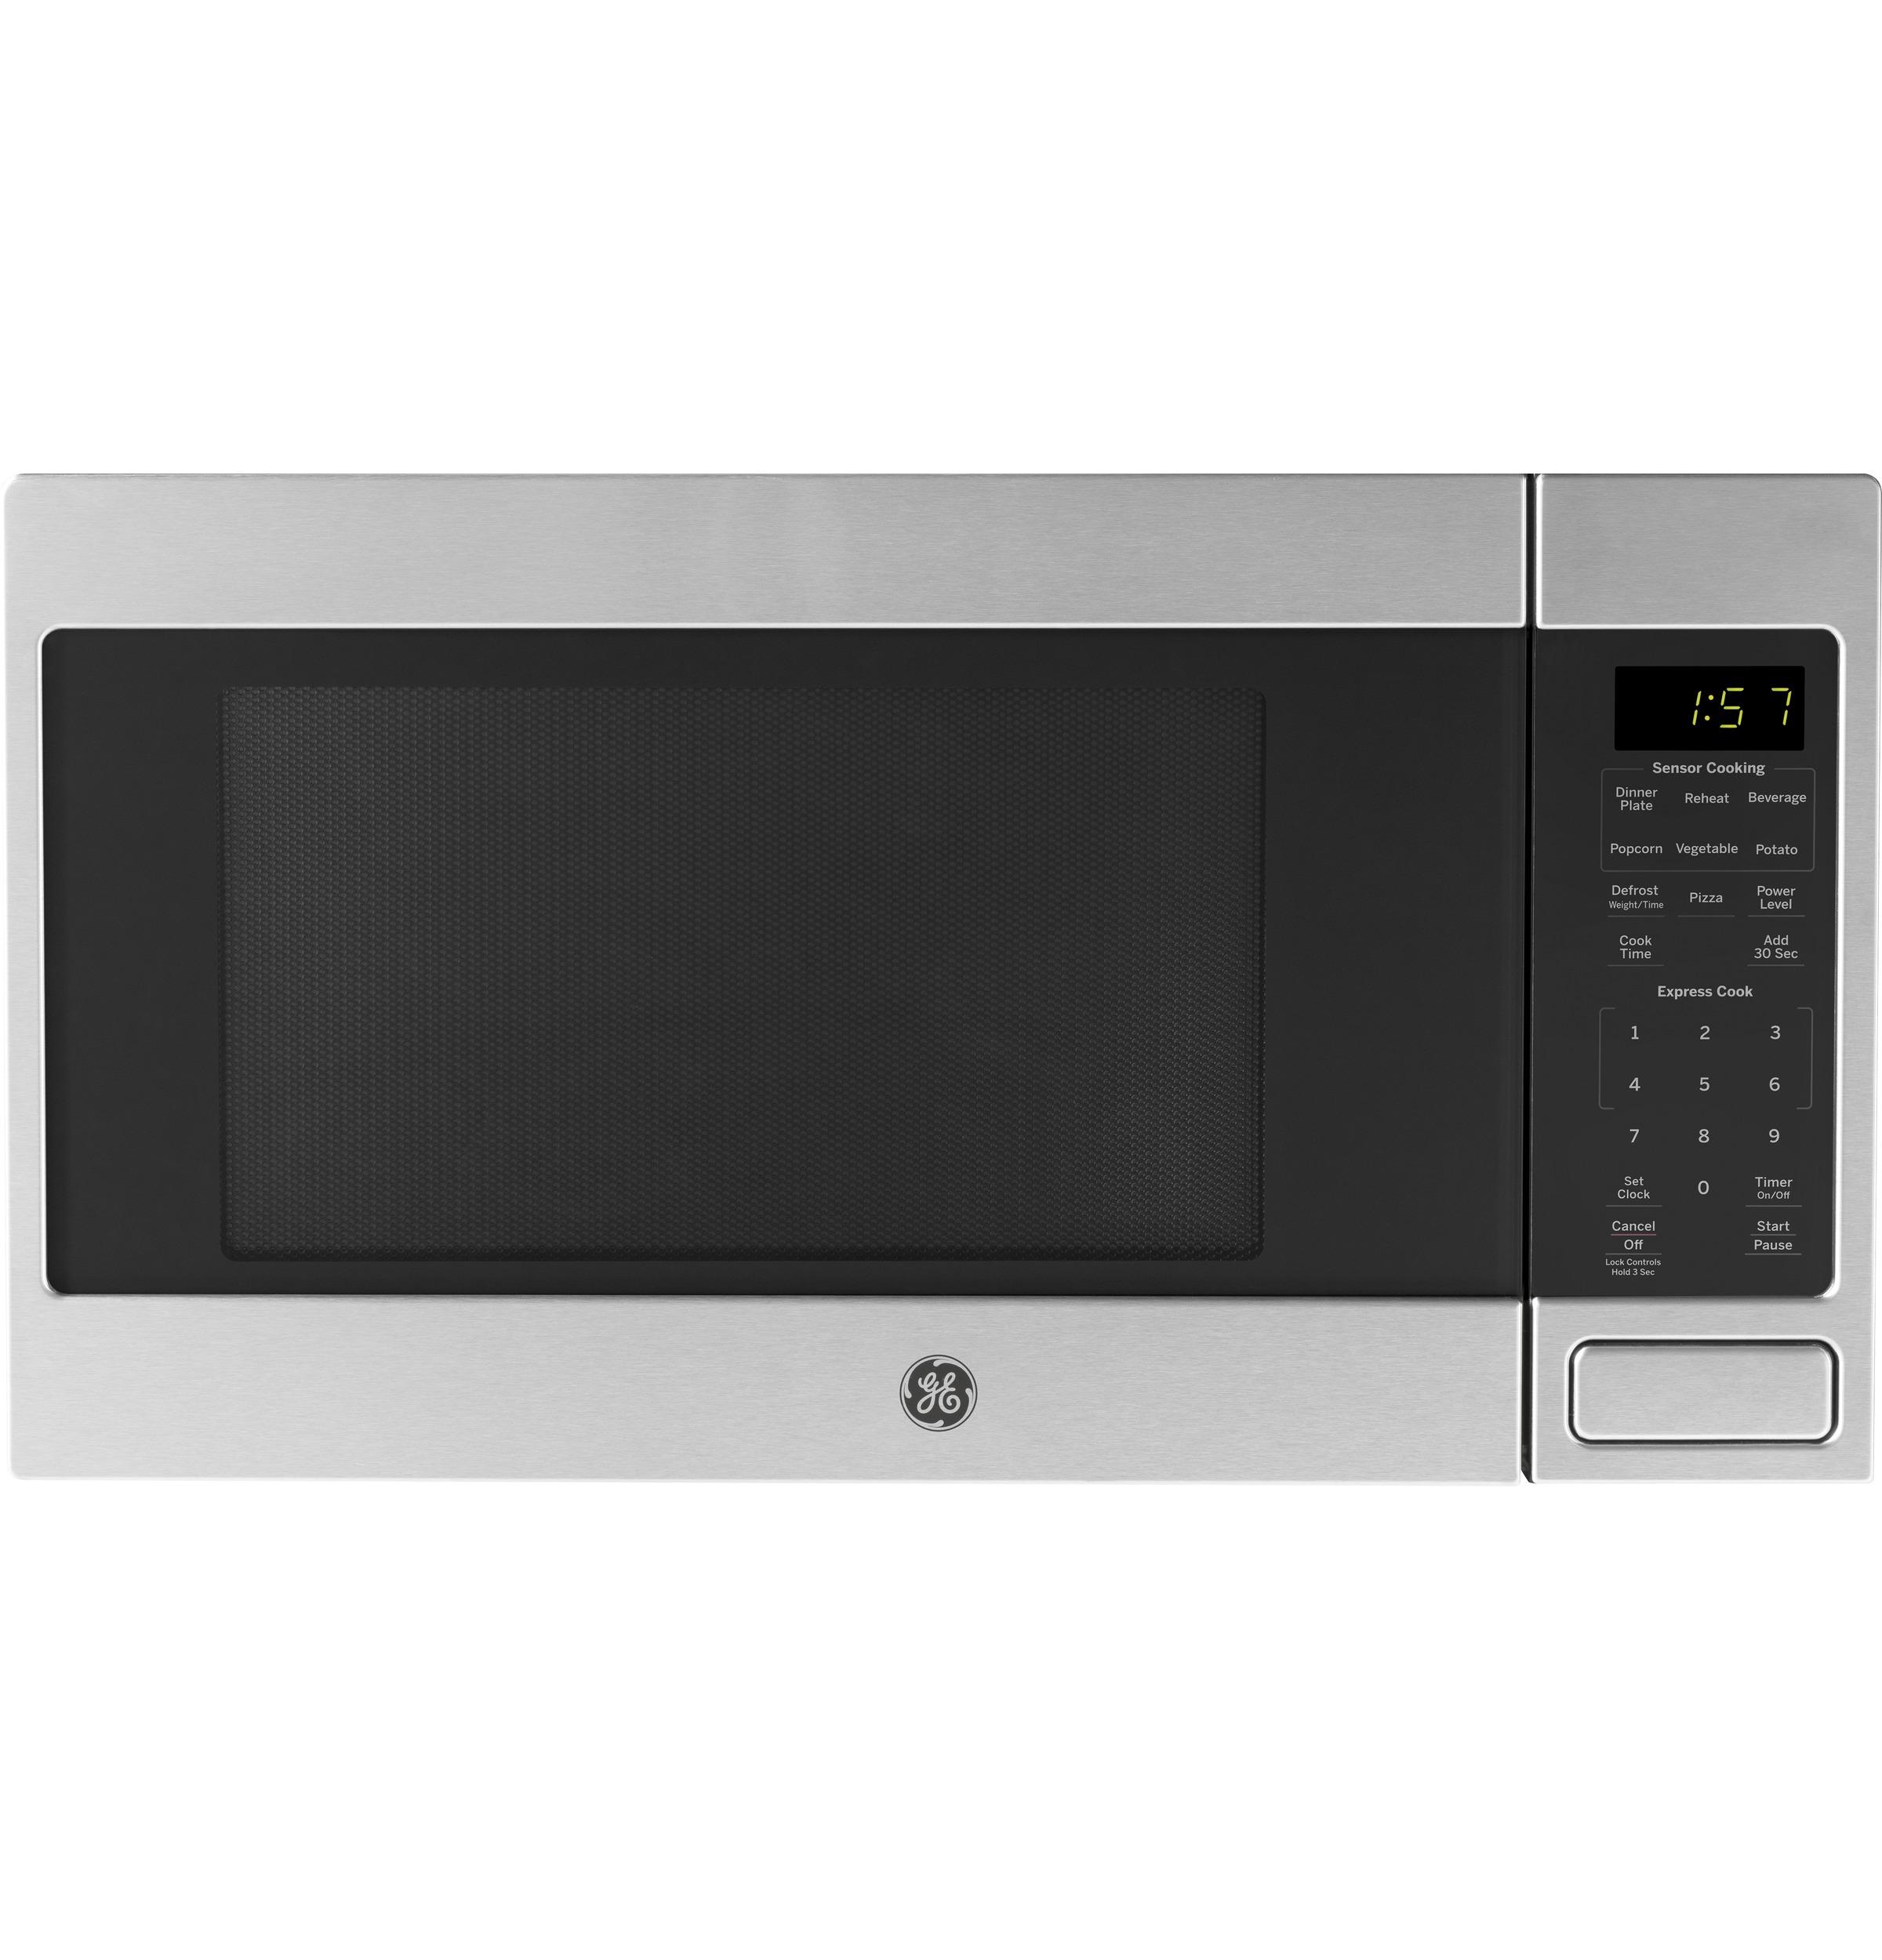 22 microwave oven